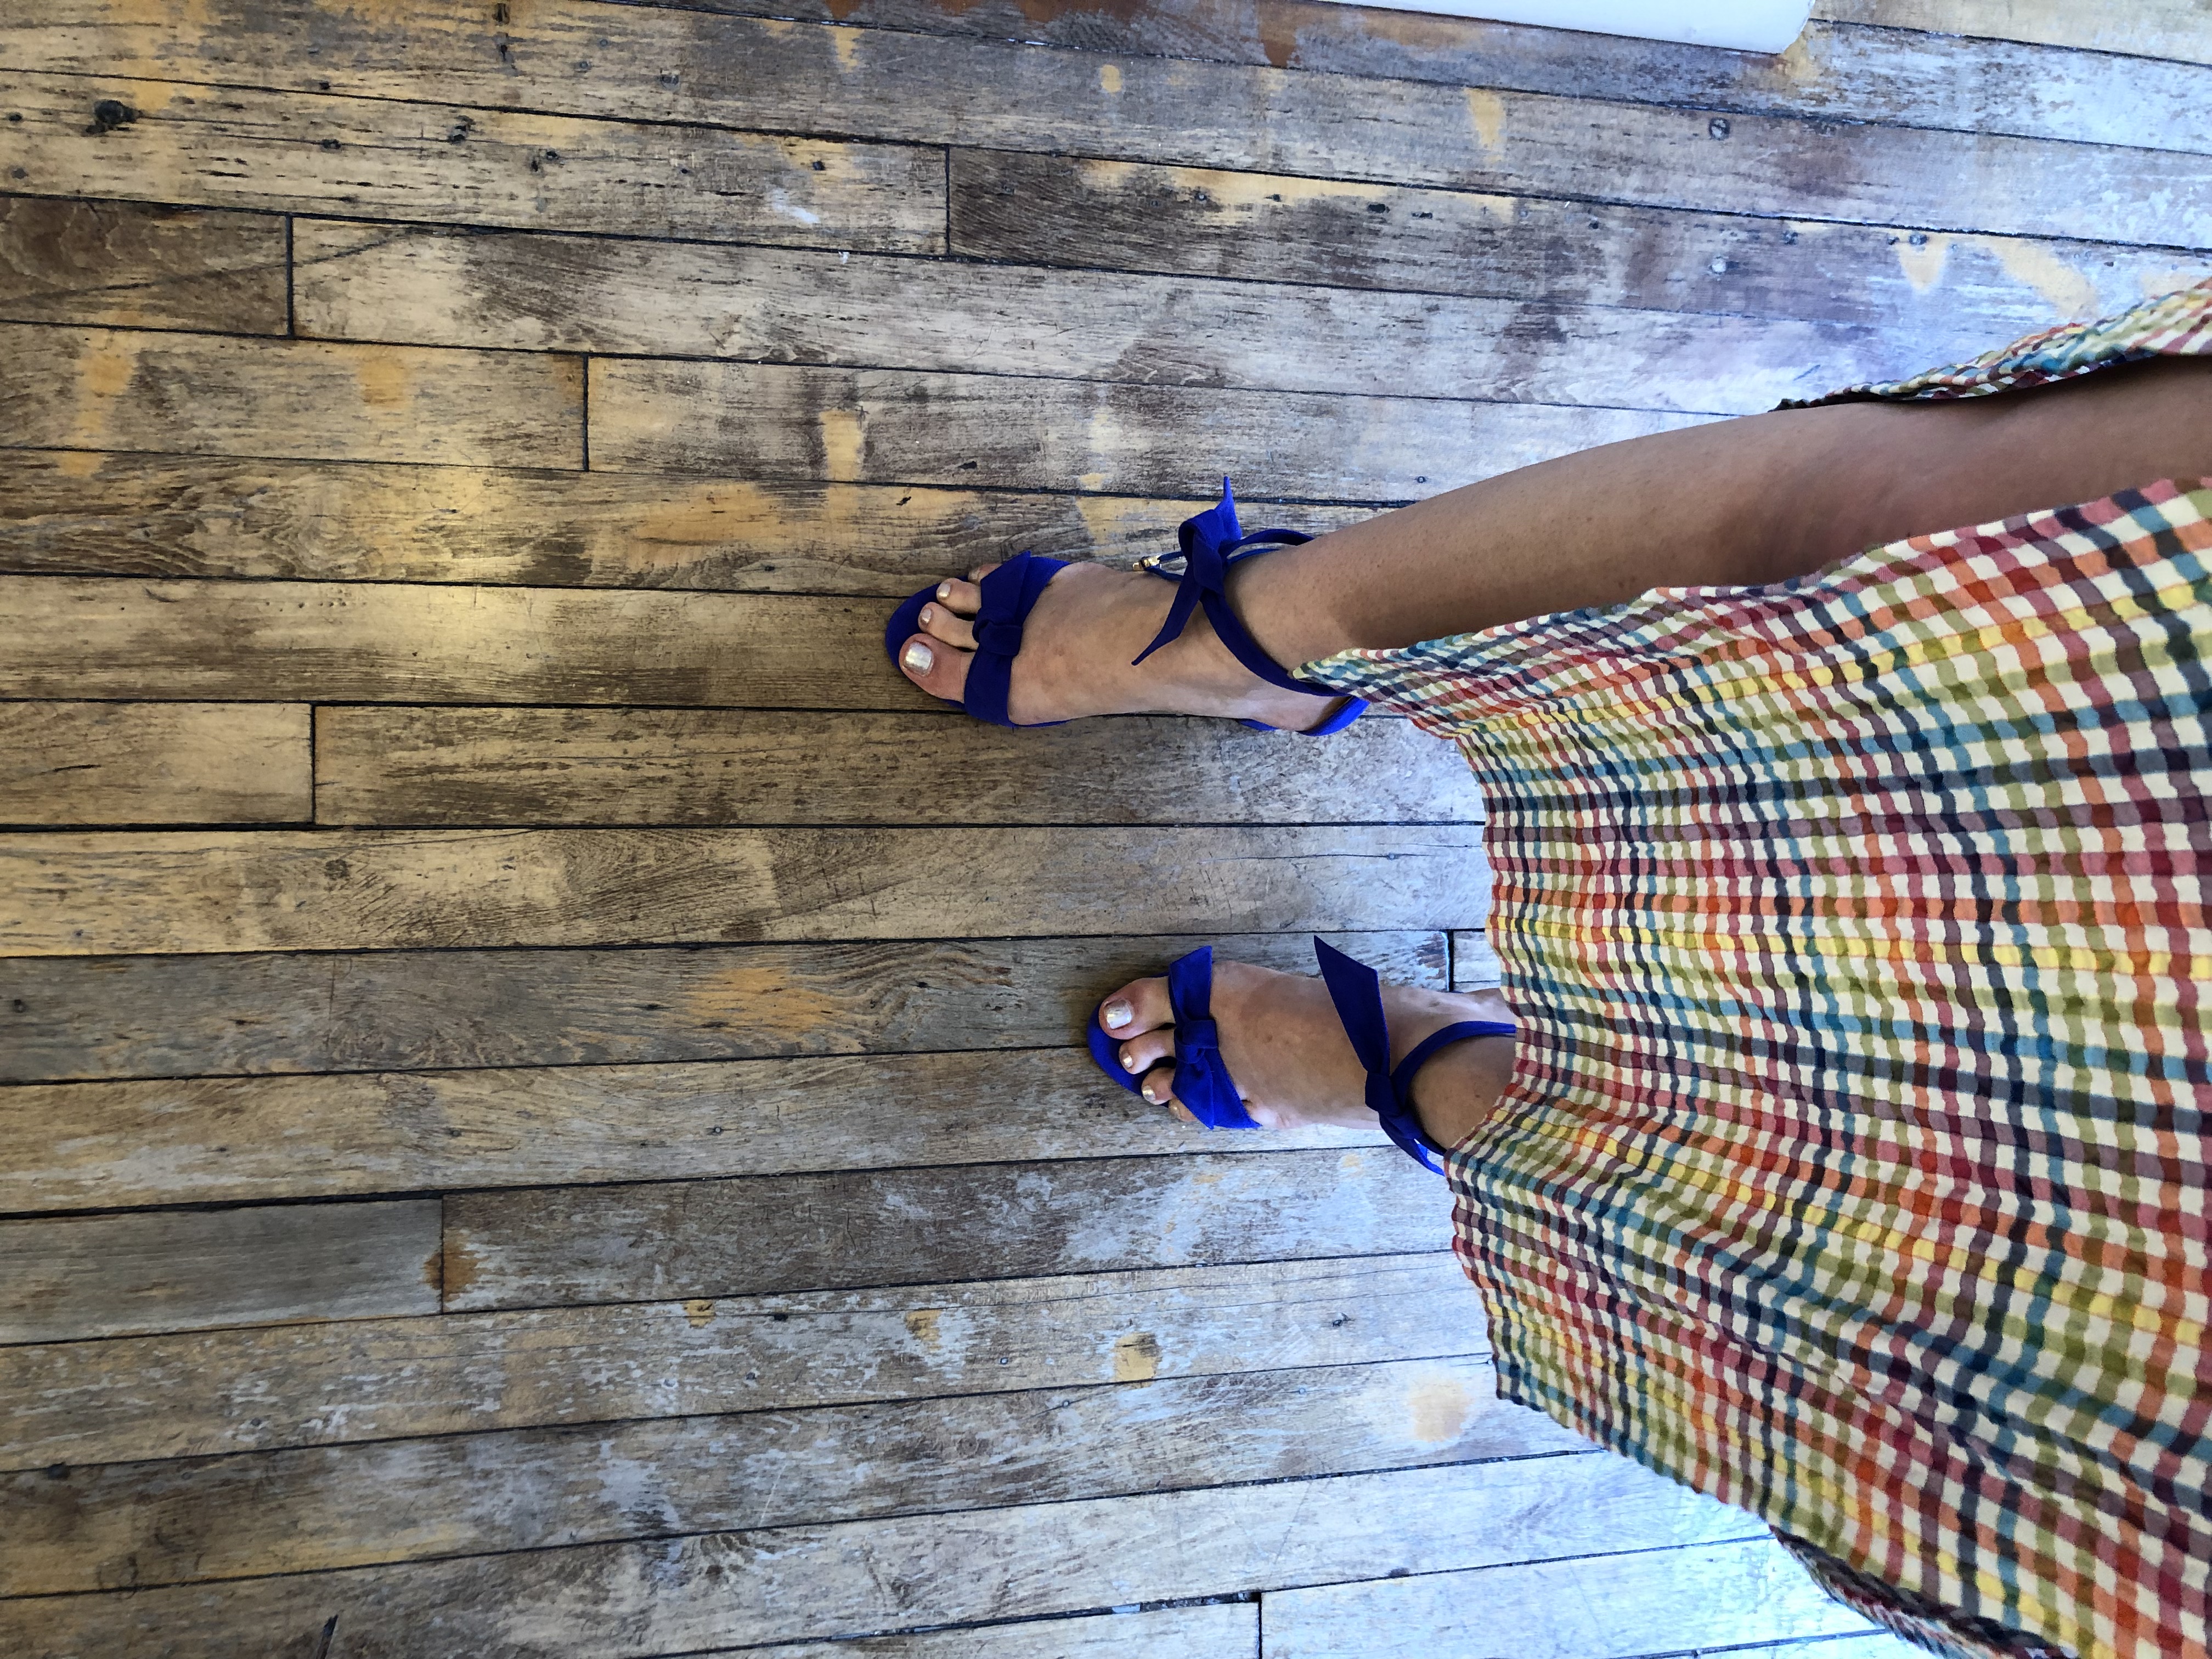 Shoefie: woman wearing a rainbow print dress and purple wedges standing on a wooden floor